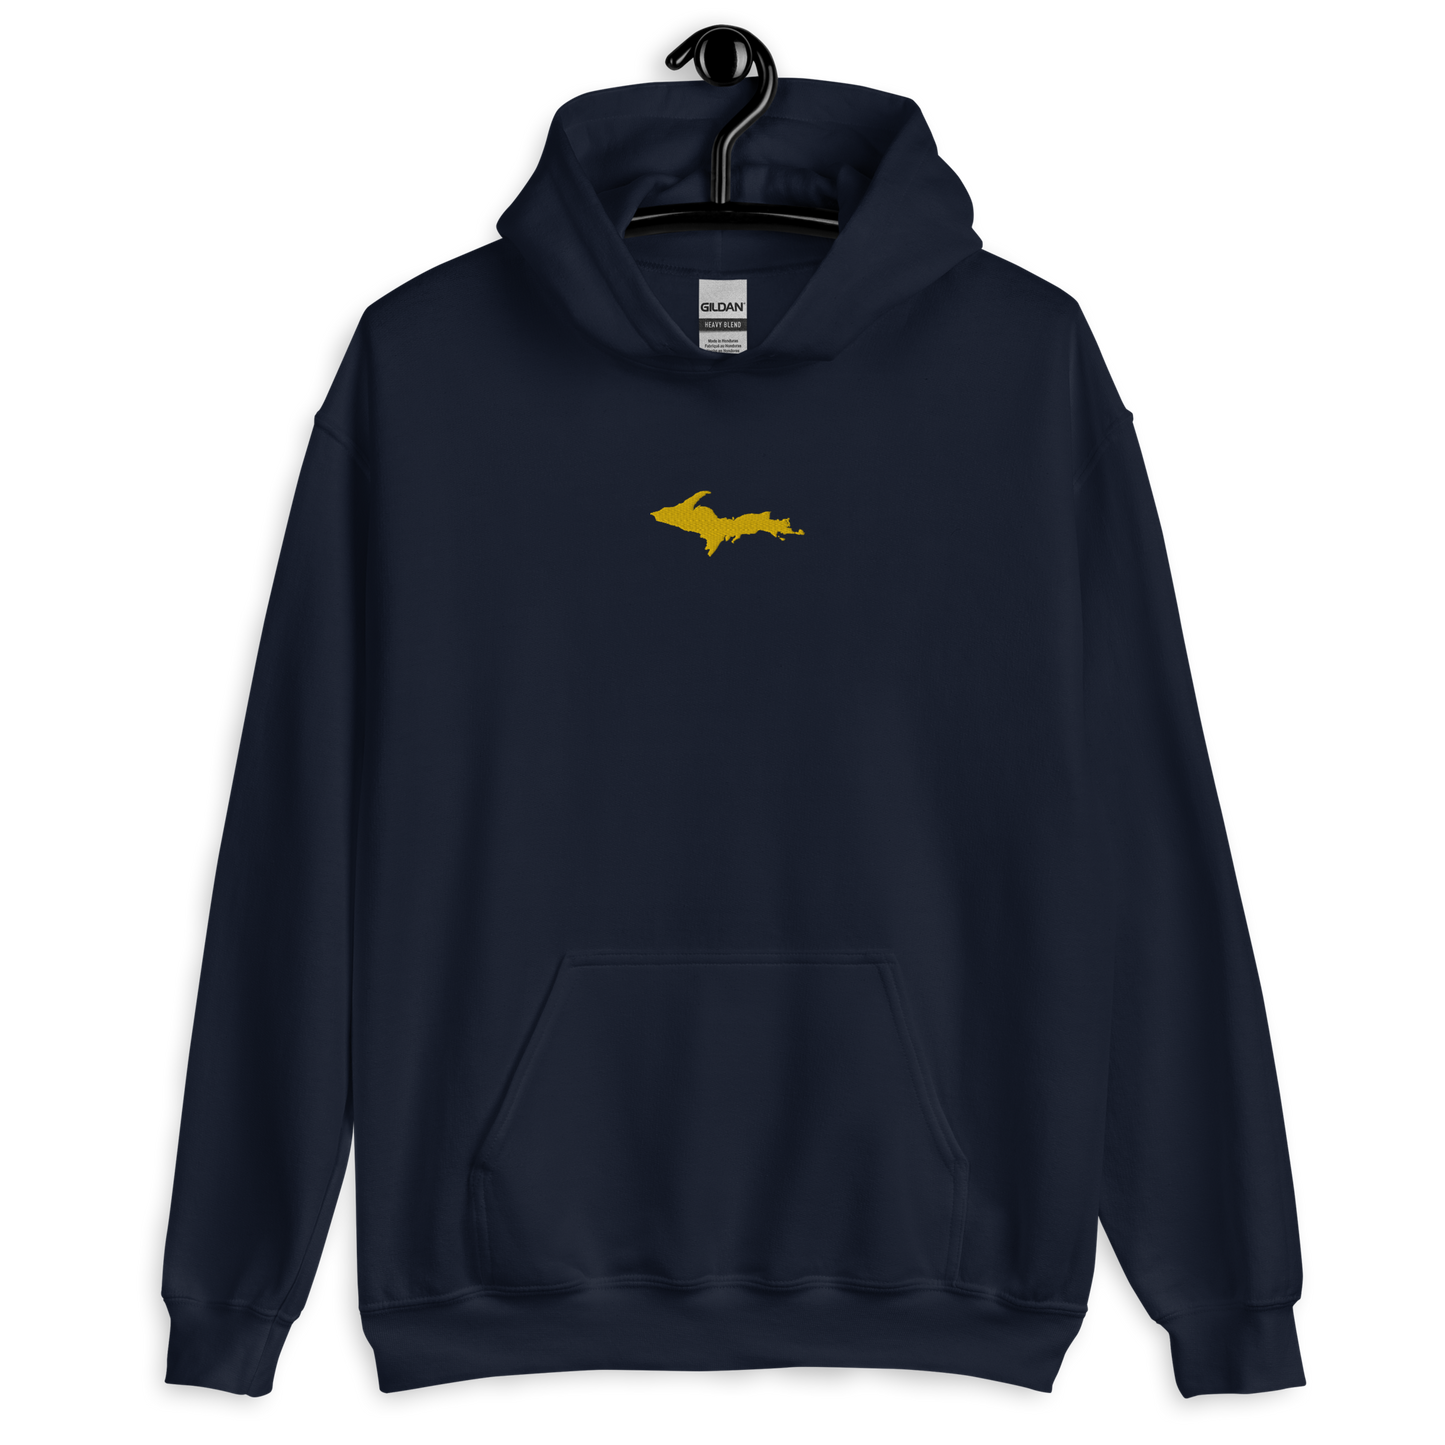 Michigan Upper Peninsula Hoodie (w/ Embroidered Gold UP Outline) | Unisex Standard